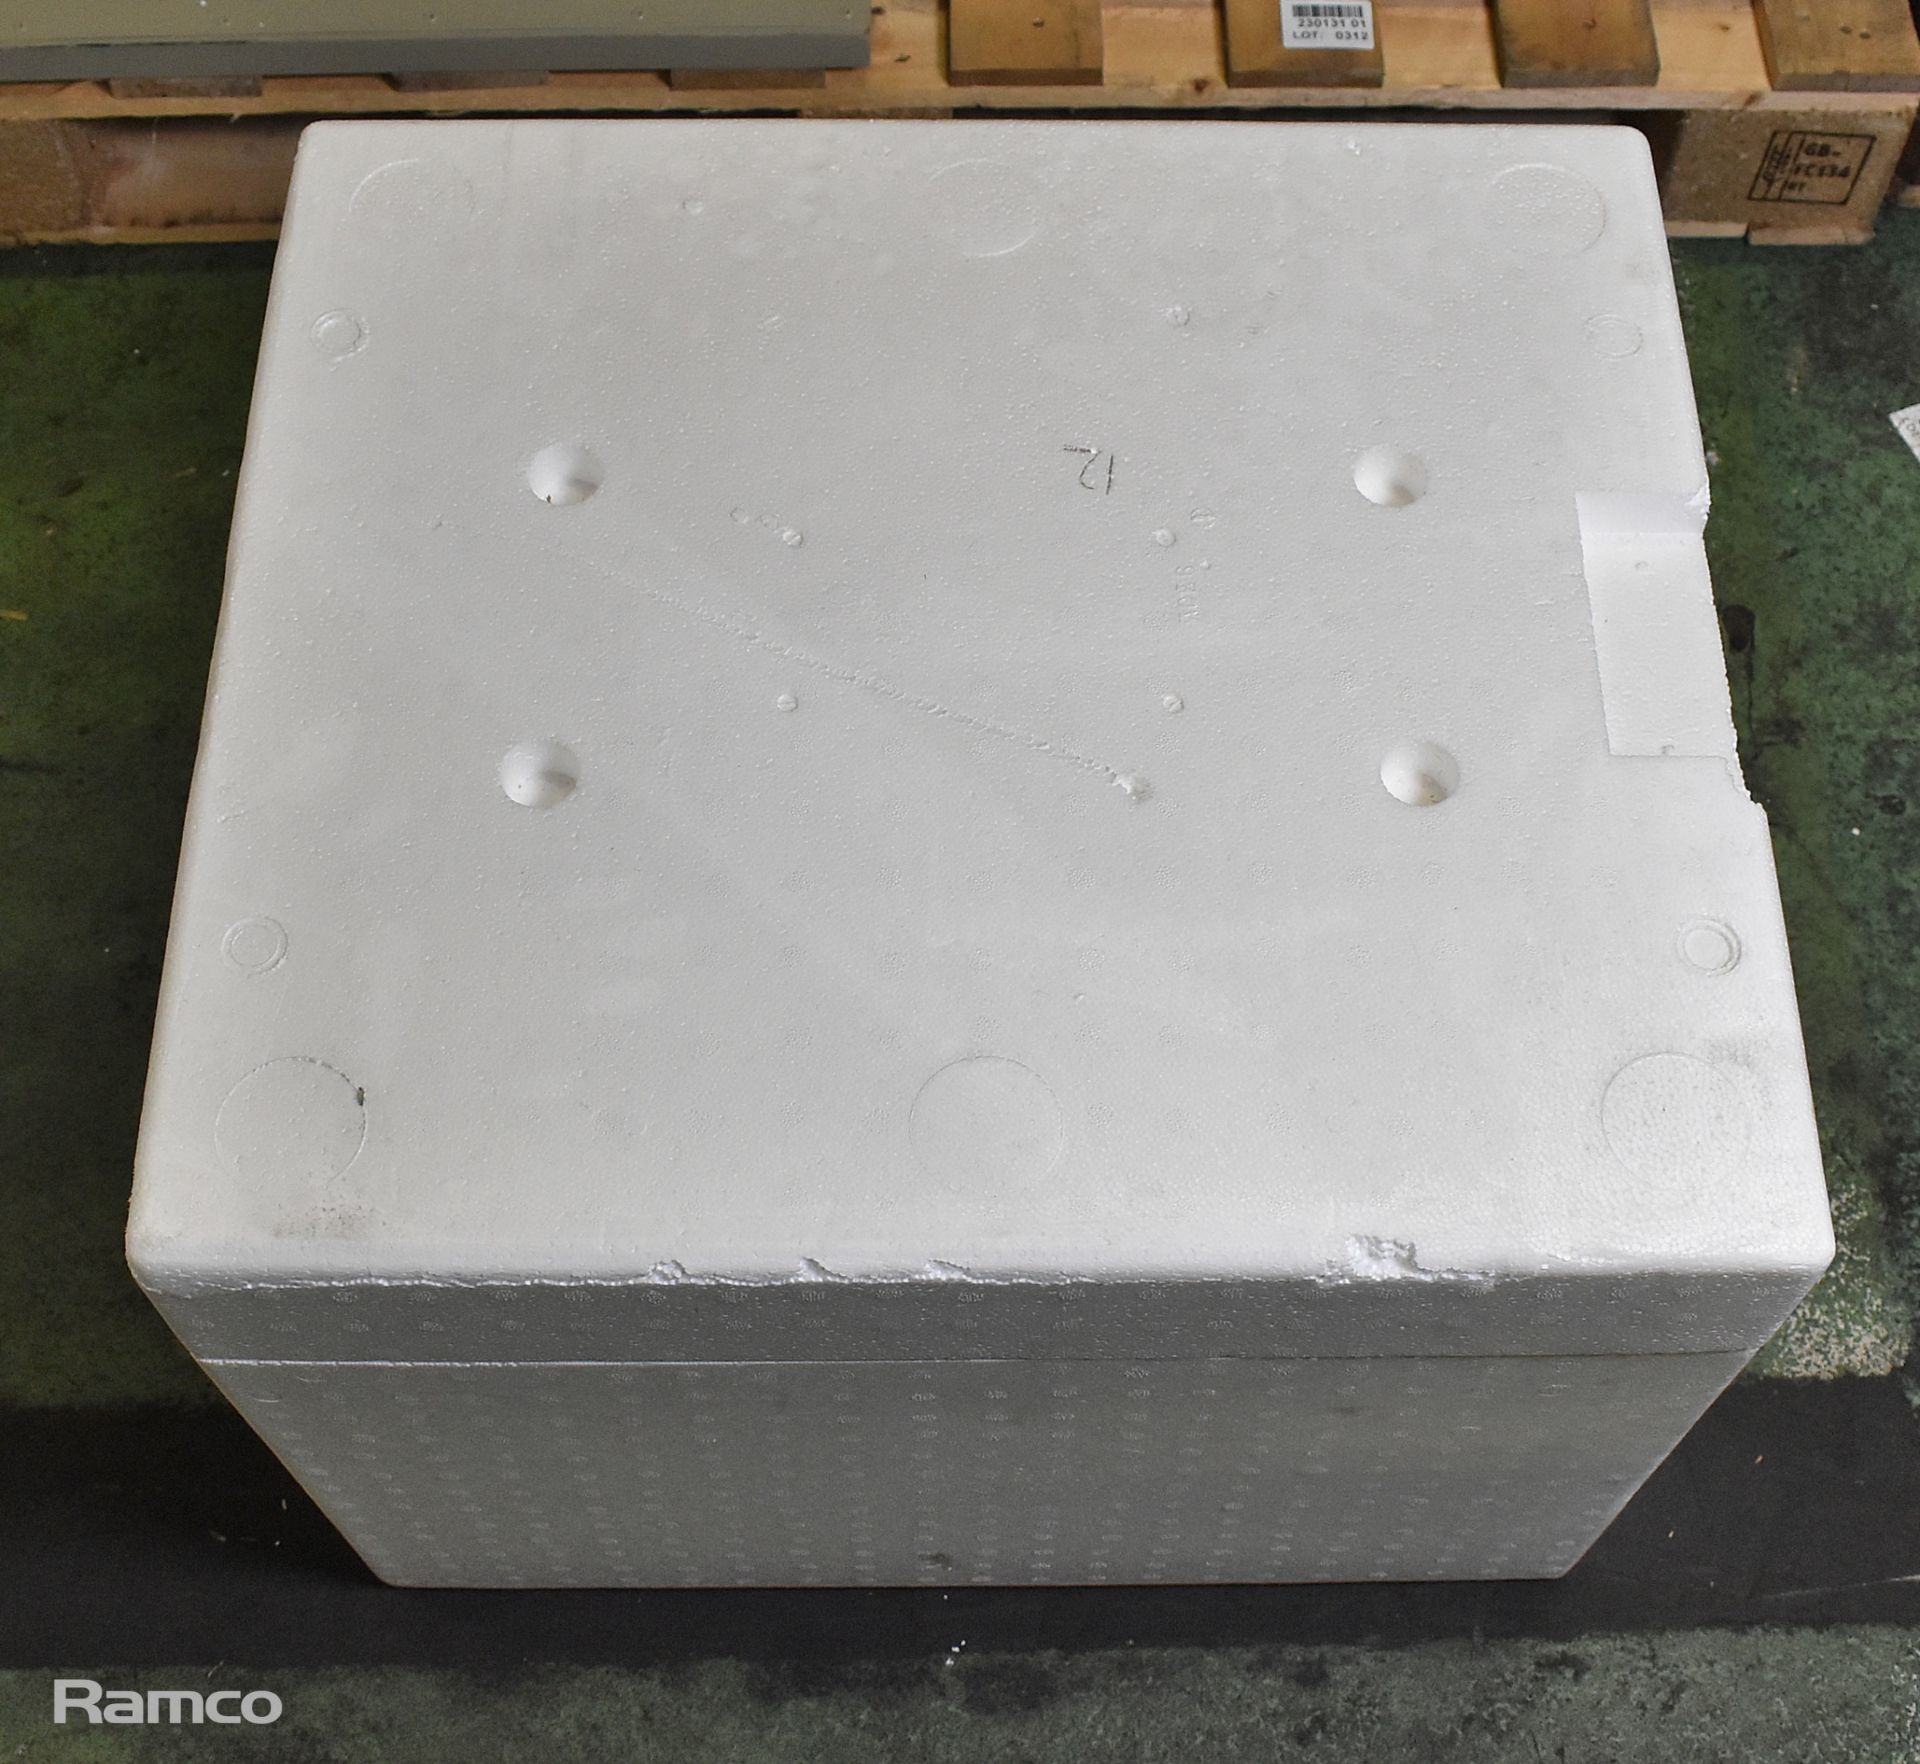 2x Pallets of polystyrene type containers with lids at 55x49x40cm - 8 containers per pallet - Image 3 of 5